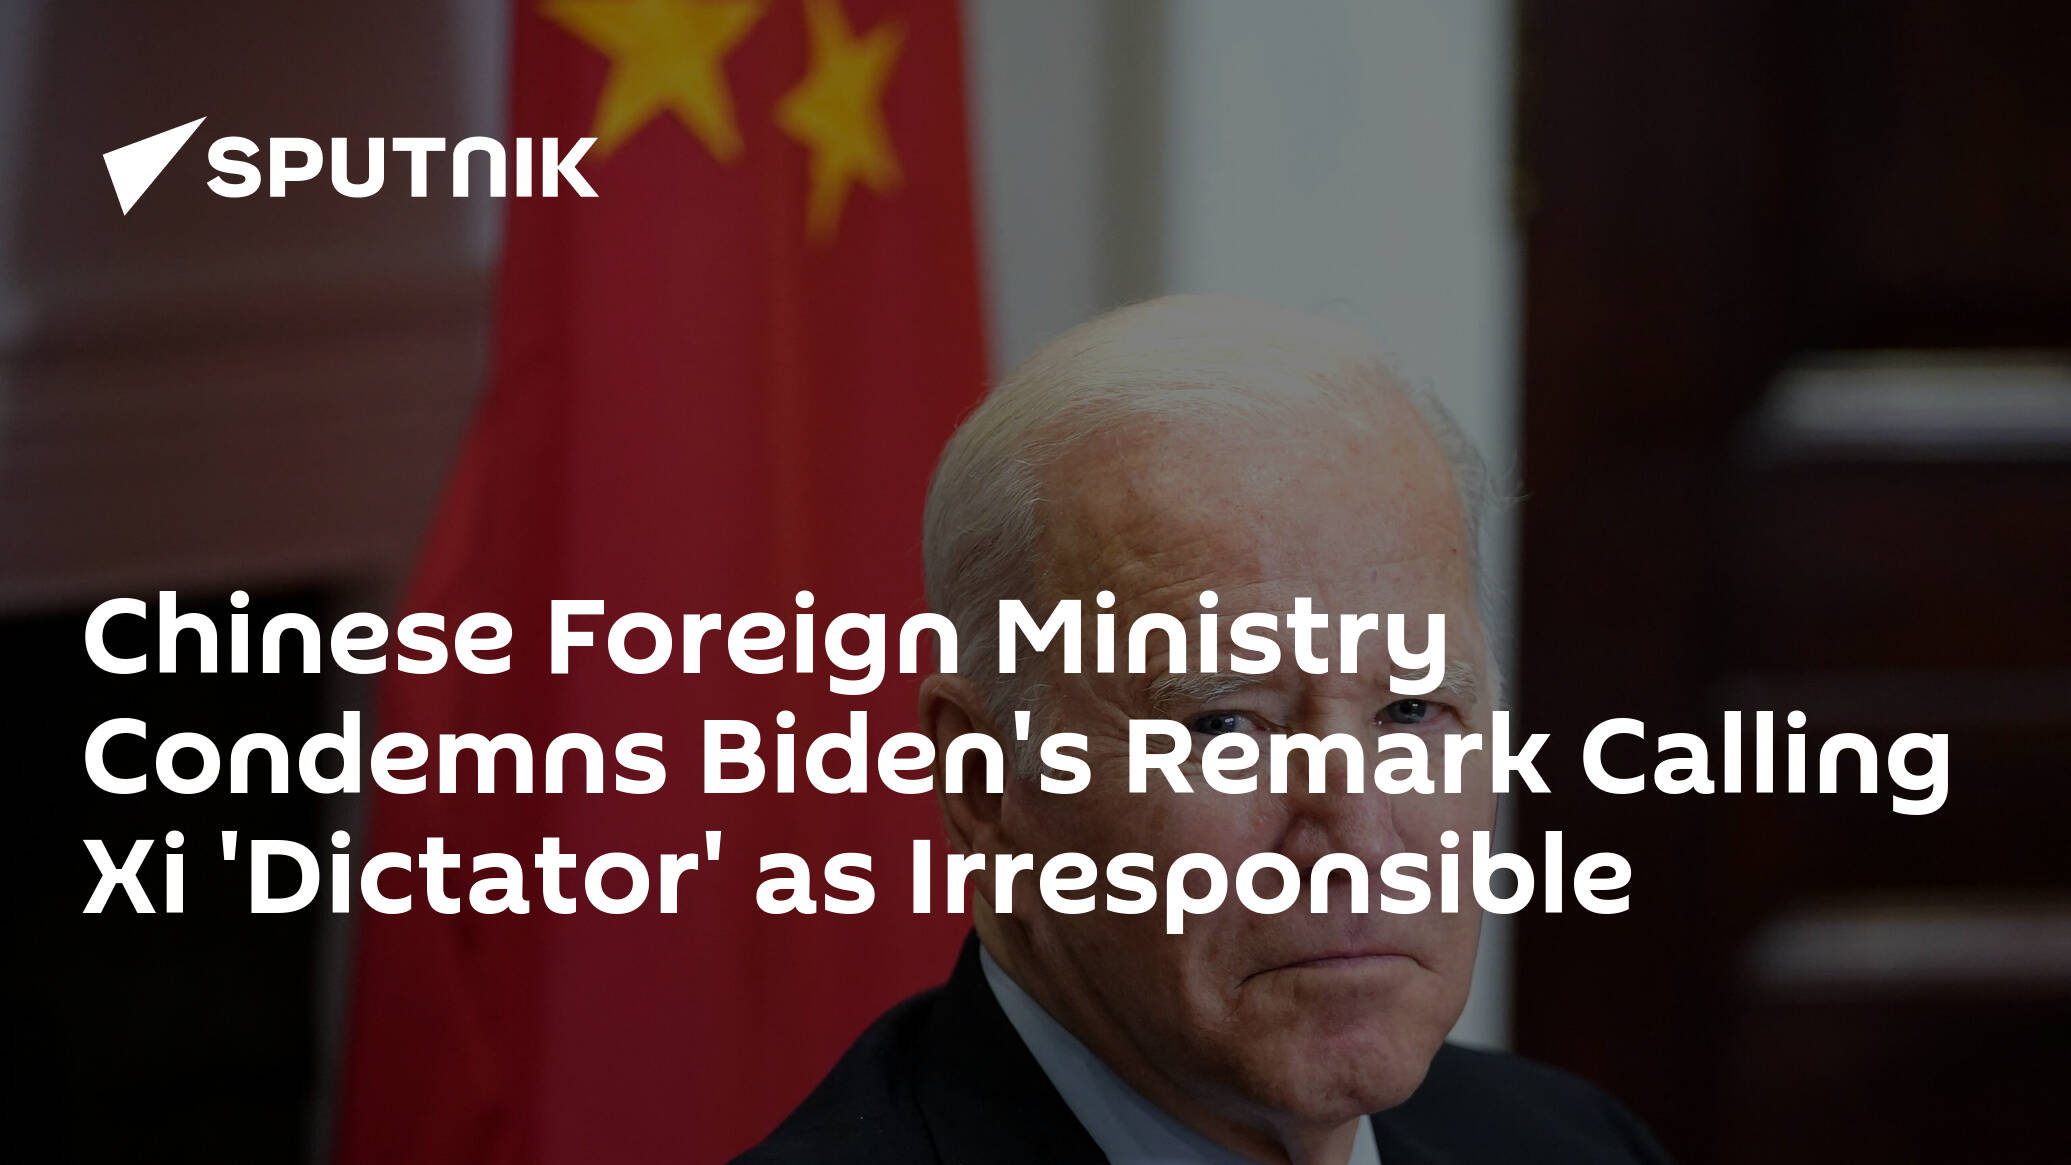 Chinese Foreign Ministry Condemns Biden's Remark Calling Xi 'Dictator' as Irresponsible